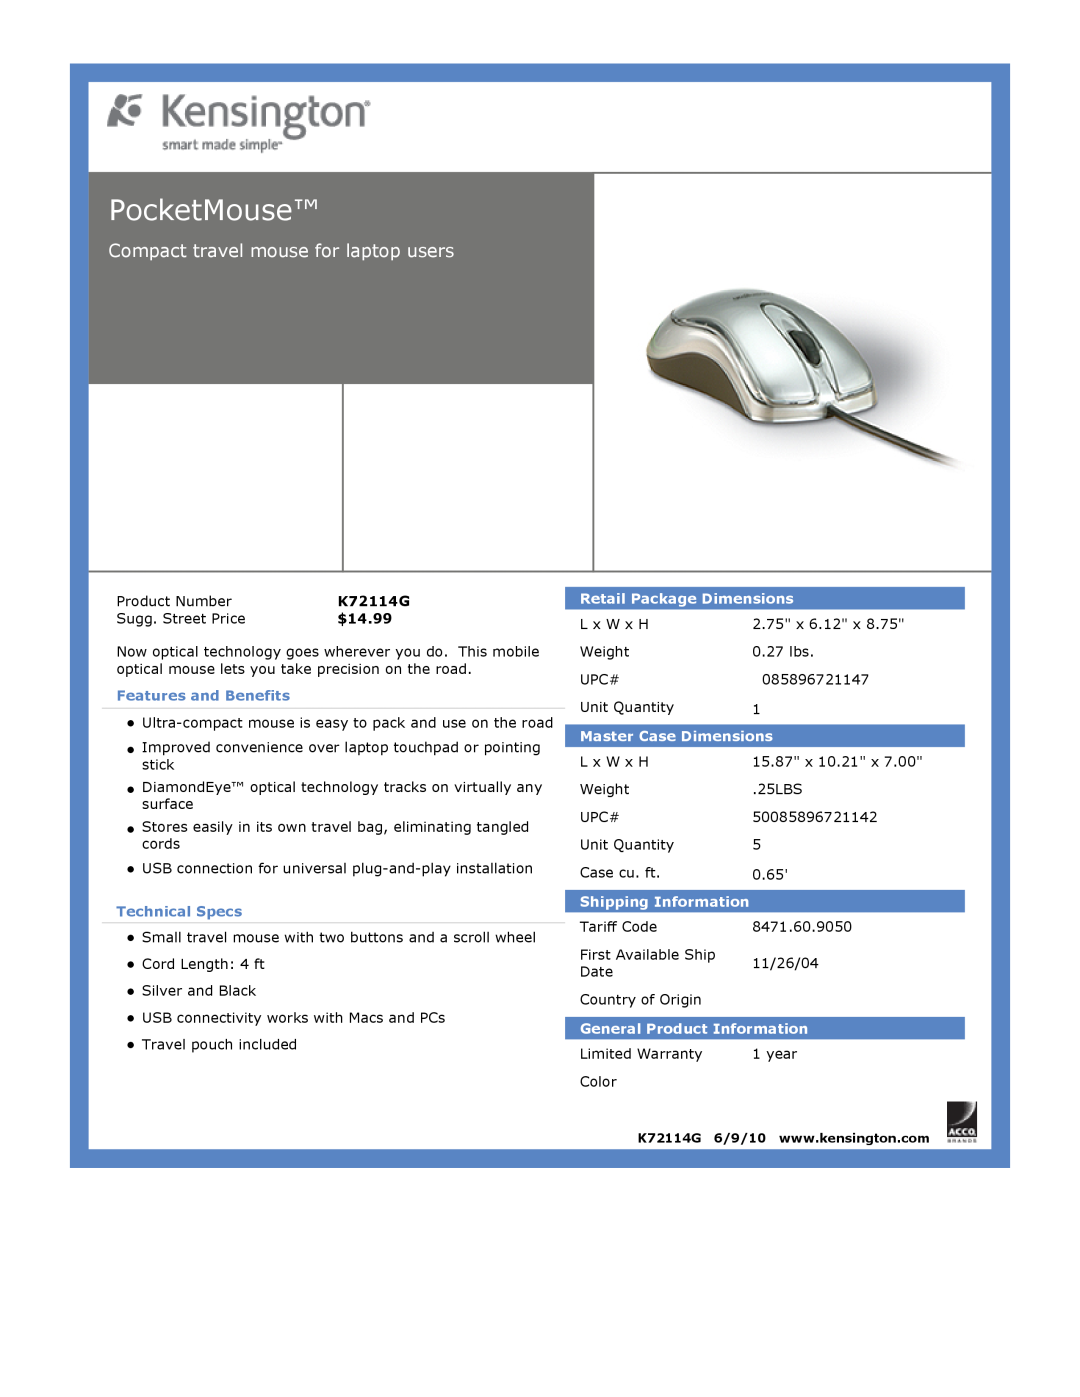 Kensington EU64325 PocketMouse, Compact travel mouse for laptop users, $14.99, Features and Benefits, Technical Specs 